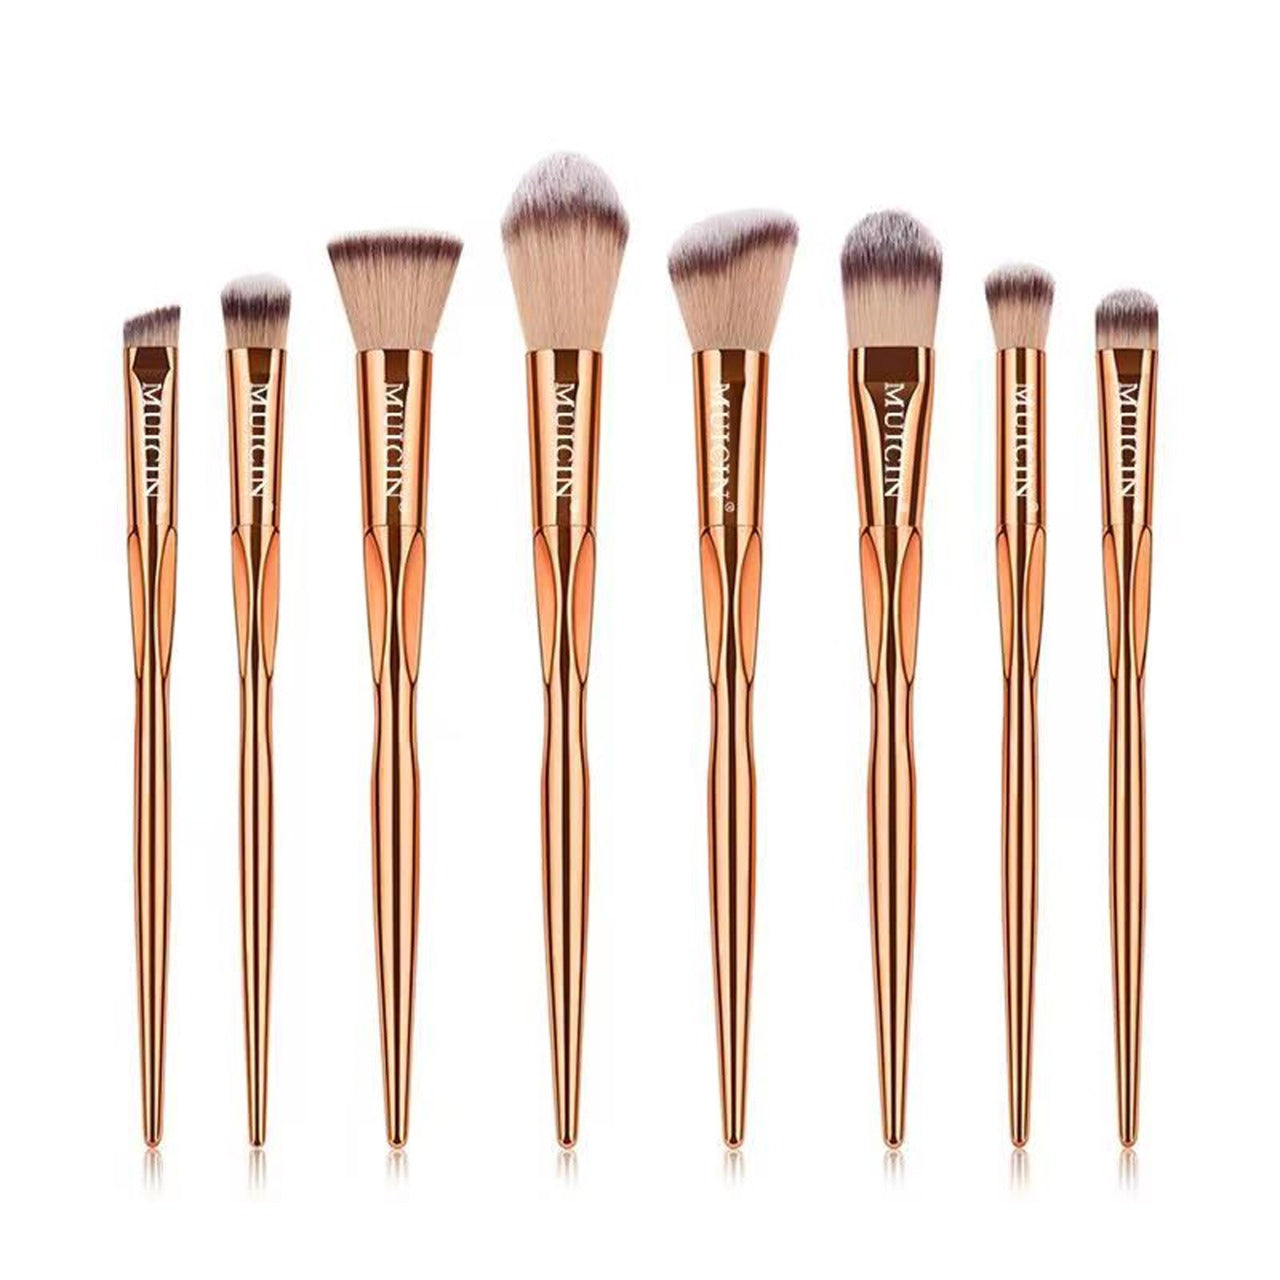 Buy  MUICIN - 8 Pieces Luxe Gold Makeup Brushes - at Best Price Online in Pakistan